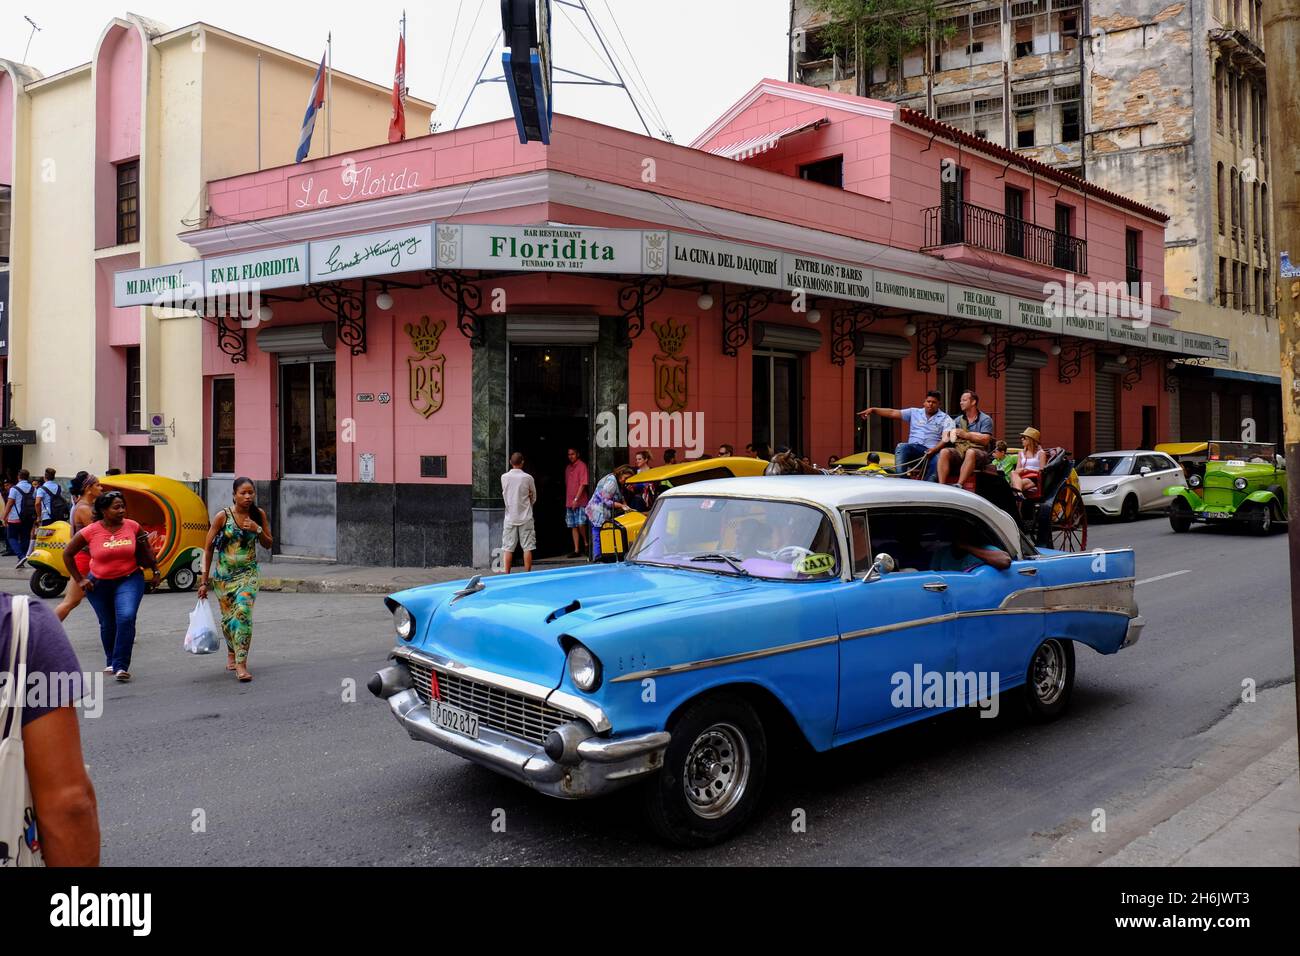 Pedestrians, vintage cars, and a horse-drawn carriage travel past Floridita on the streets of Havana, Havana, Cuba, West Indies, Central America Stock Photo